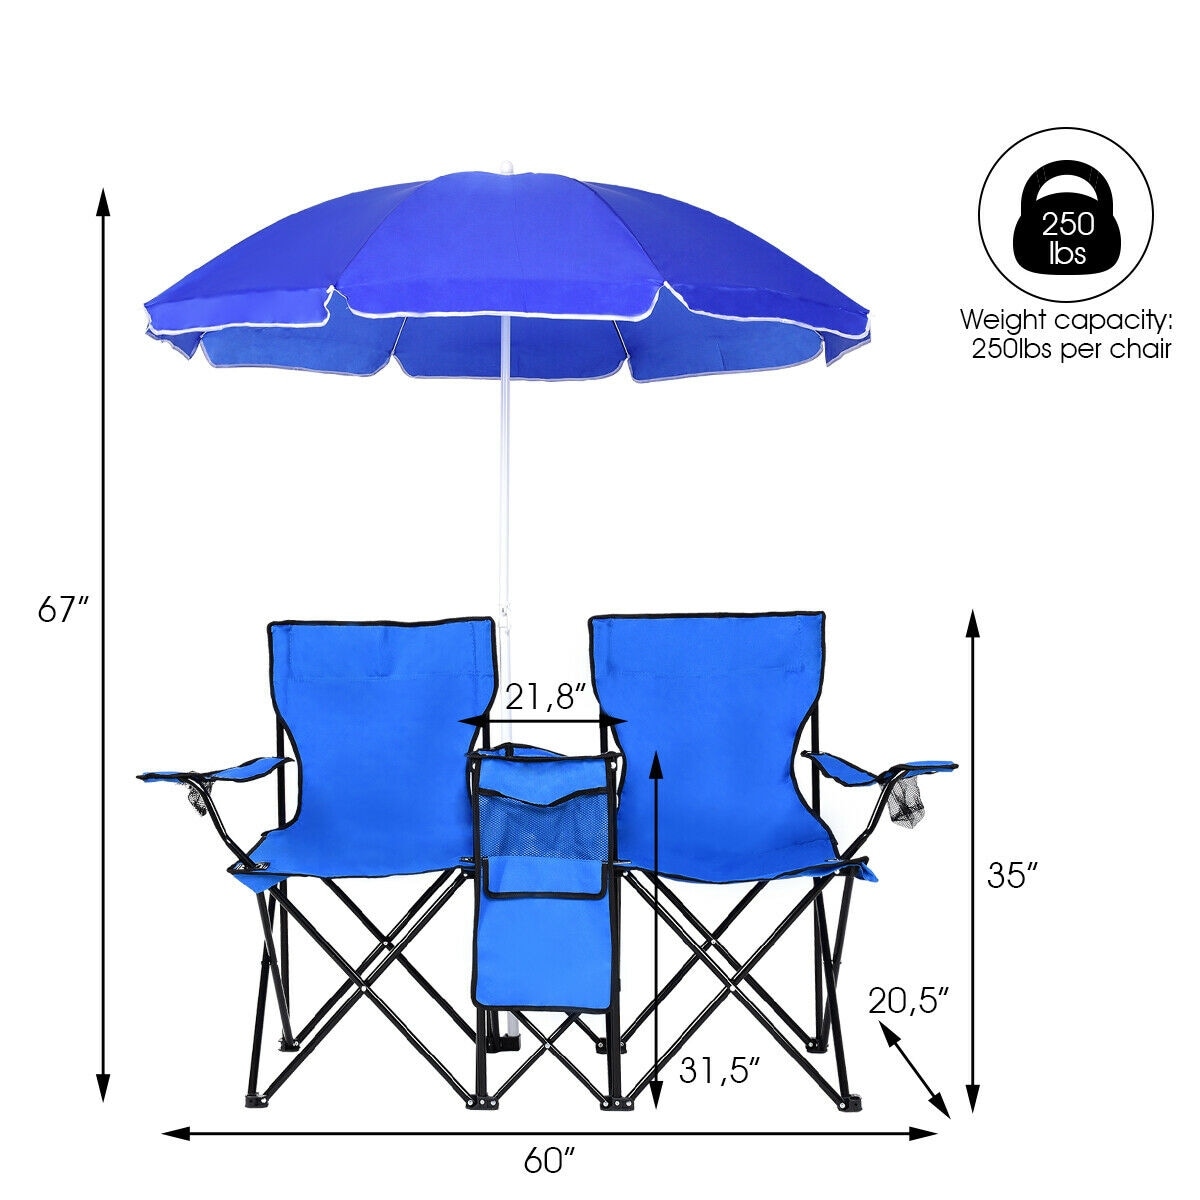 camping chair with shade